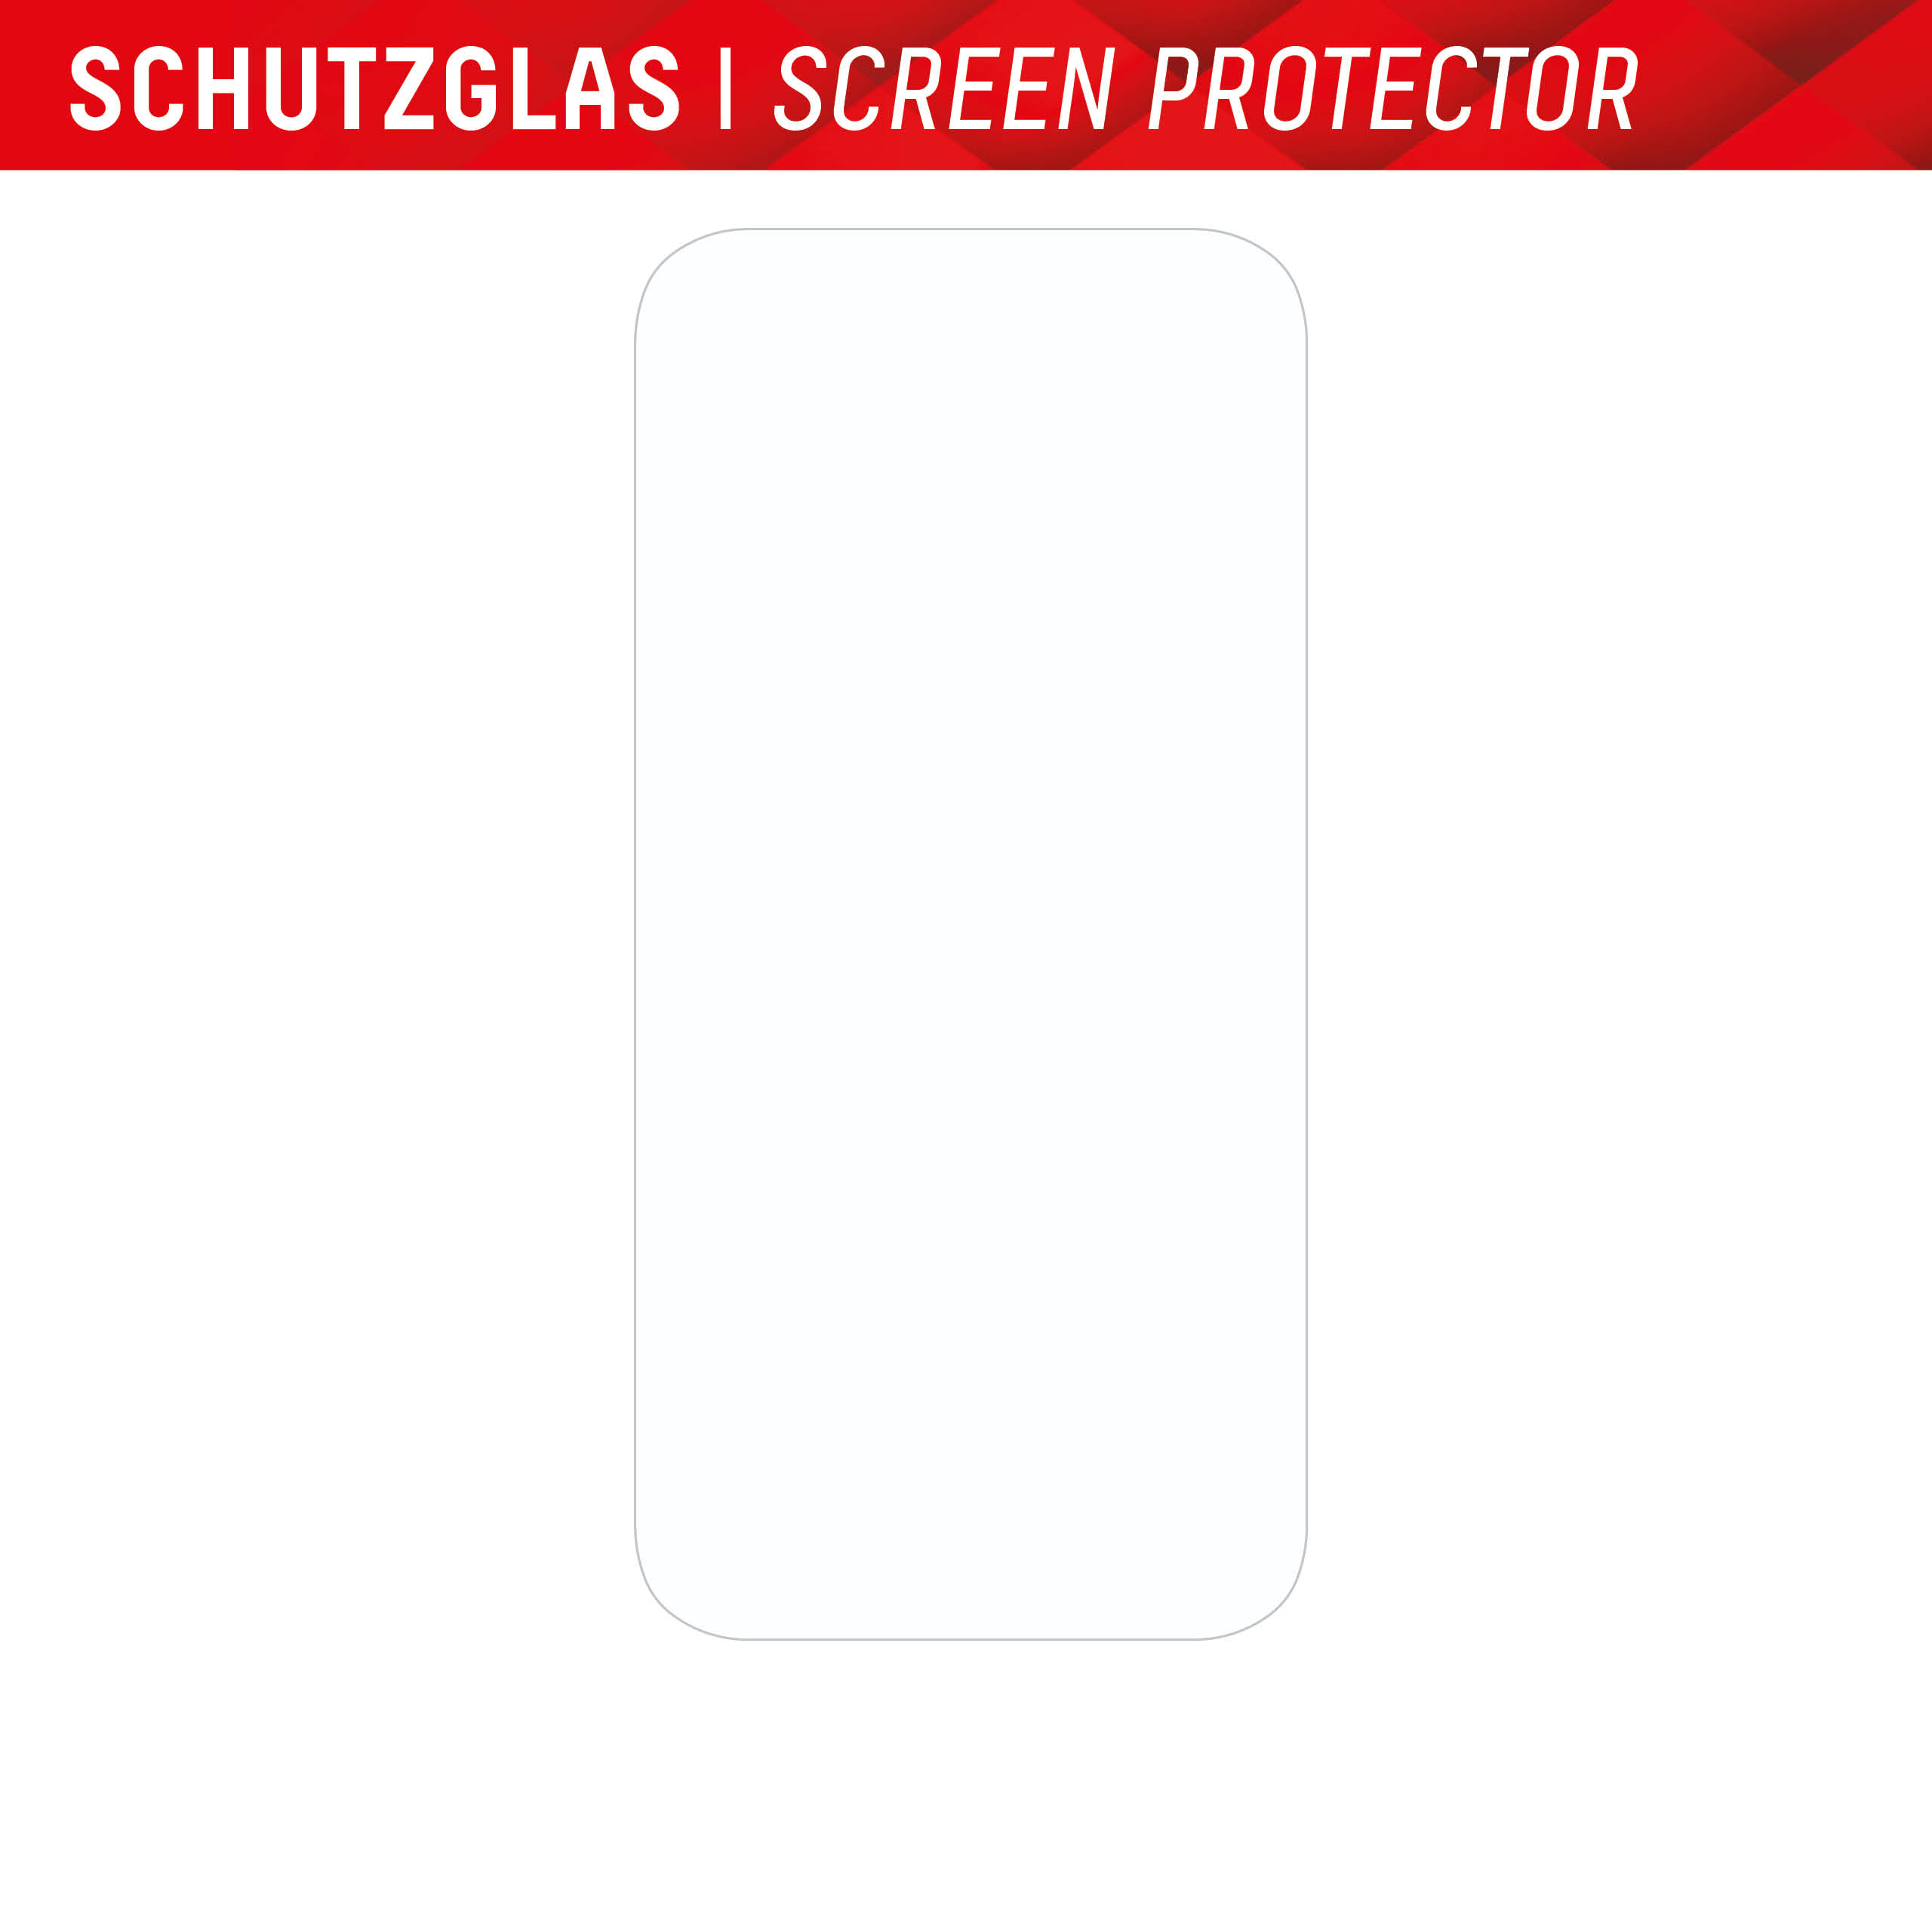 iPhone 15 Pro Max Screen Protector (2D) + Case